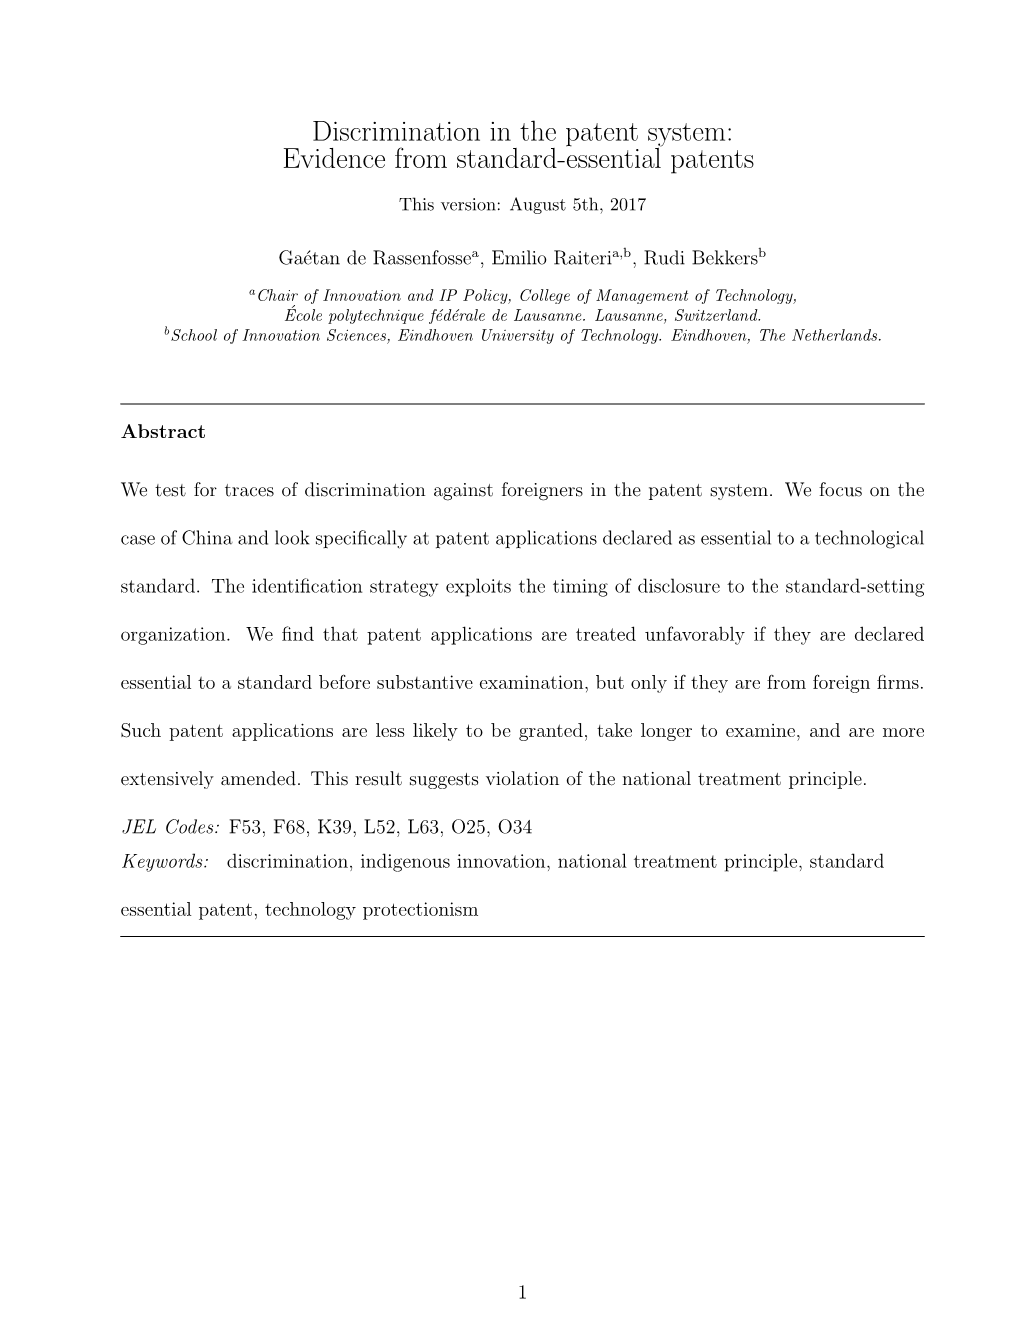 Discrimination in the Patent System: Evidence from Standard-Essential Patents